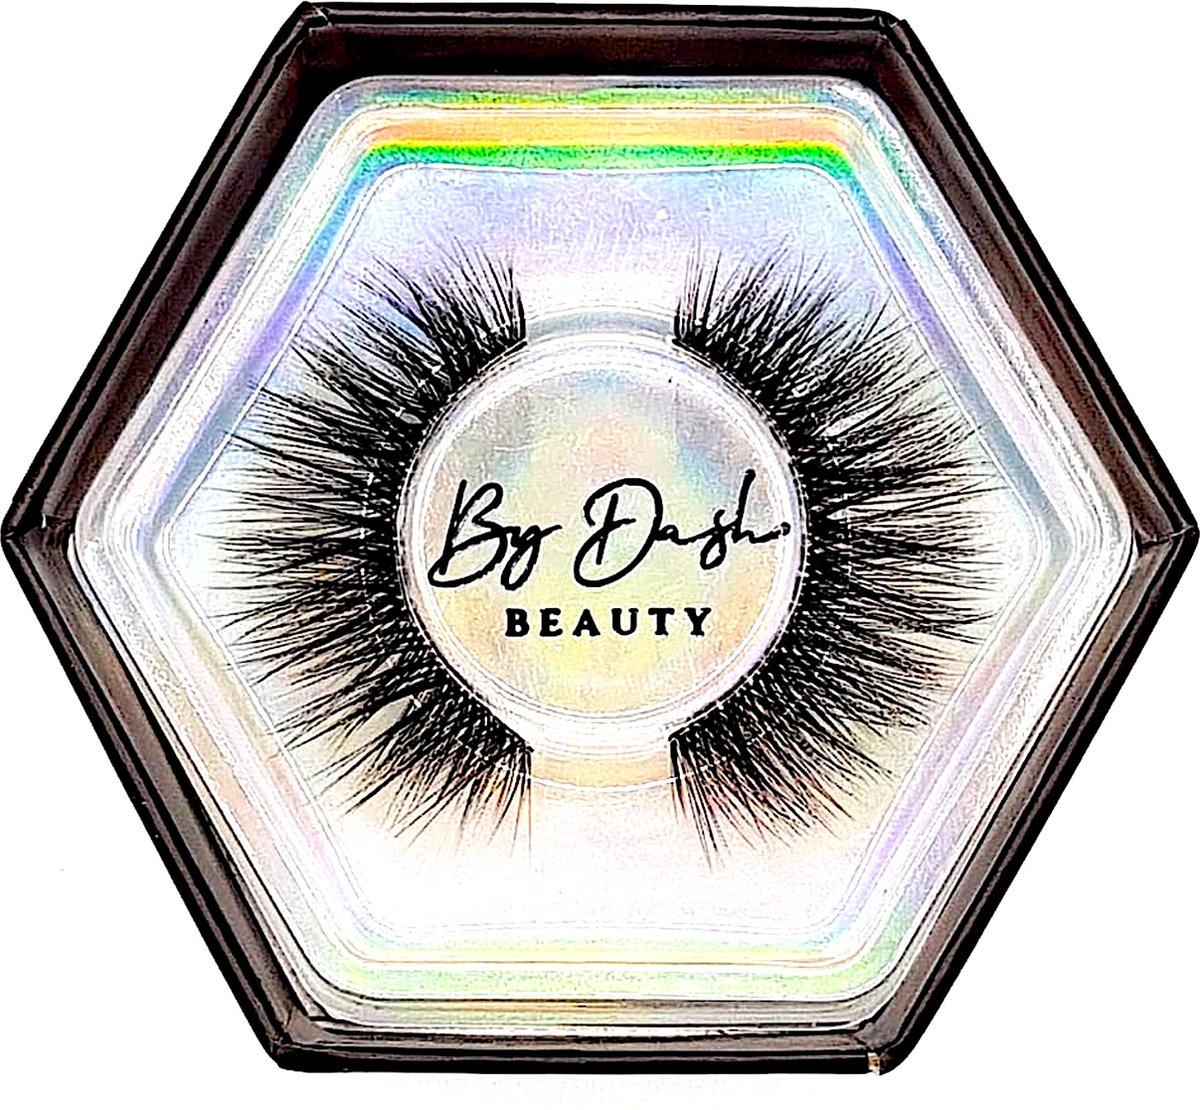 By Dash Beauty - Angel Eyes - Valse Wimpers - Nepwimpers - 3D Faux Mink Lashes - Luxury Lashes